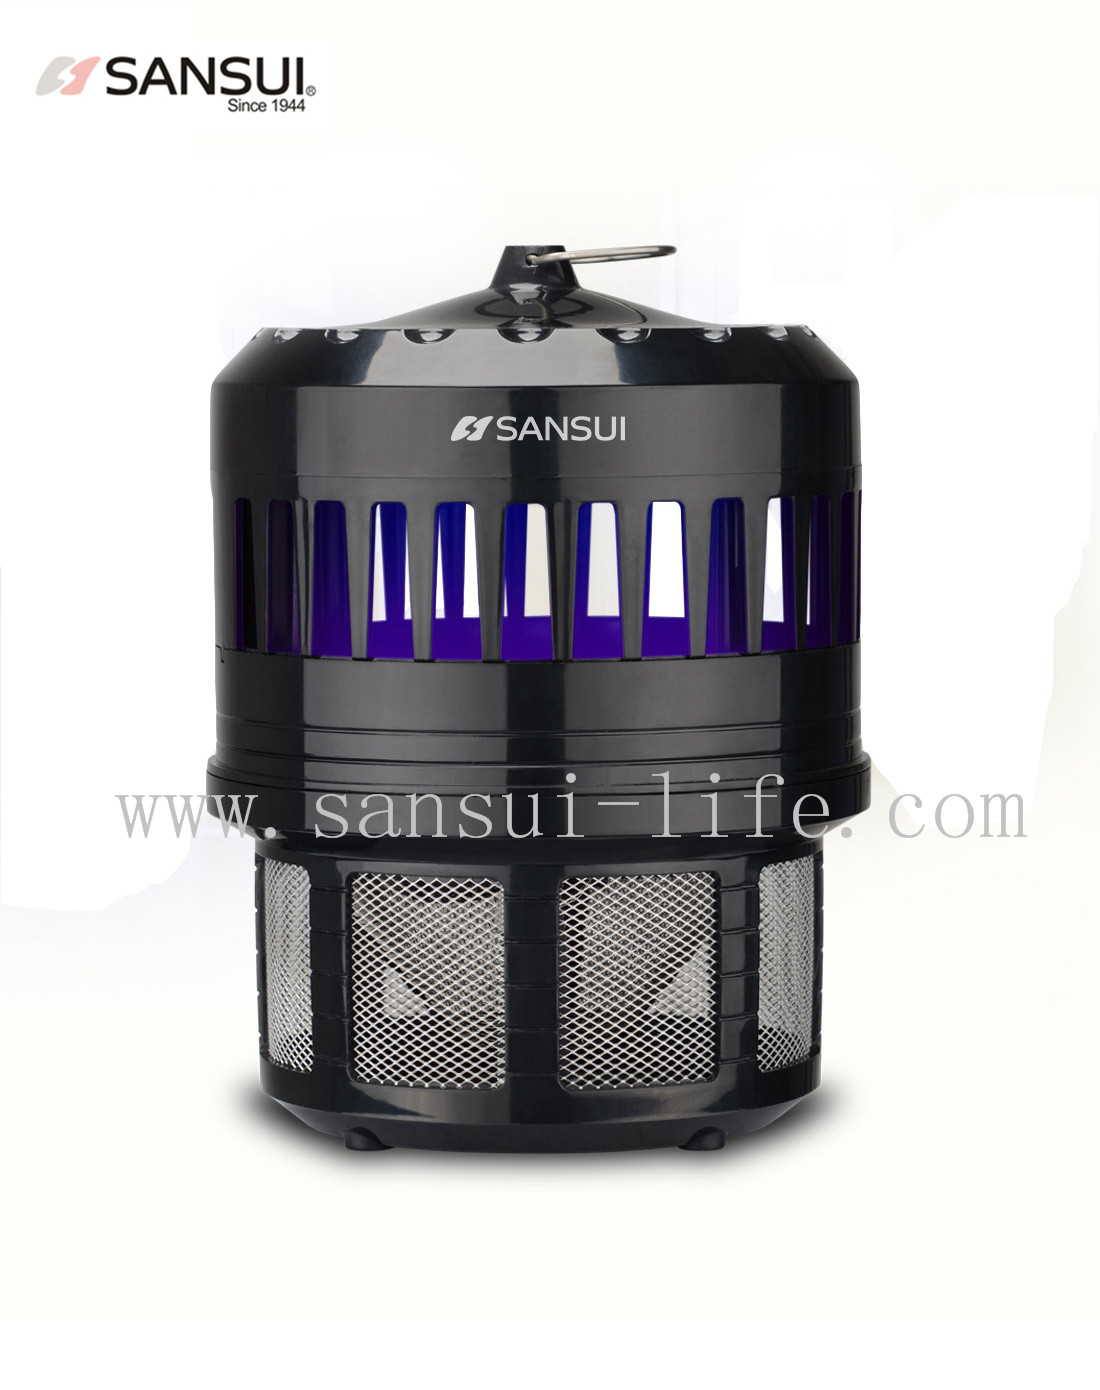 SANSUI The third generation mosquito control technology,5W ultra-low power Mosquito Killer